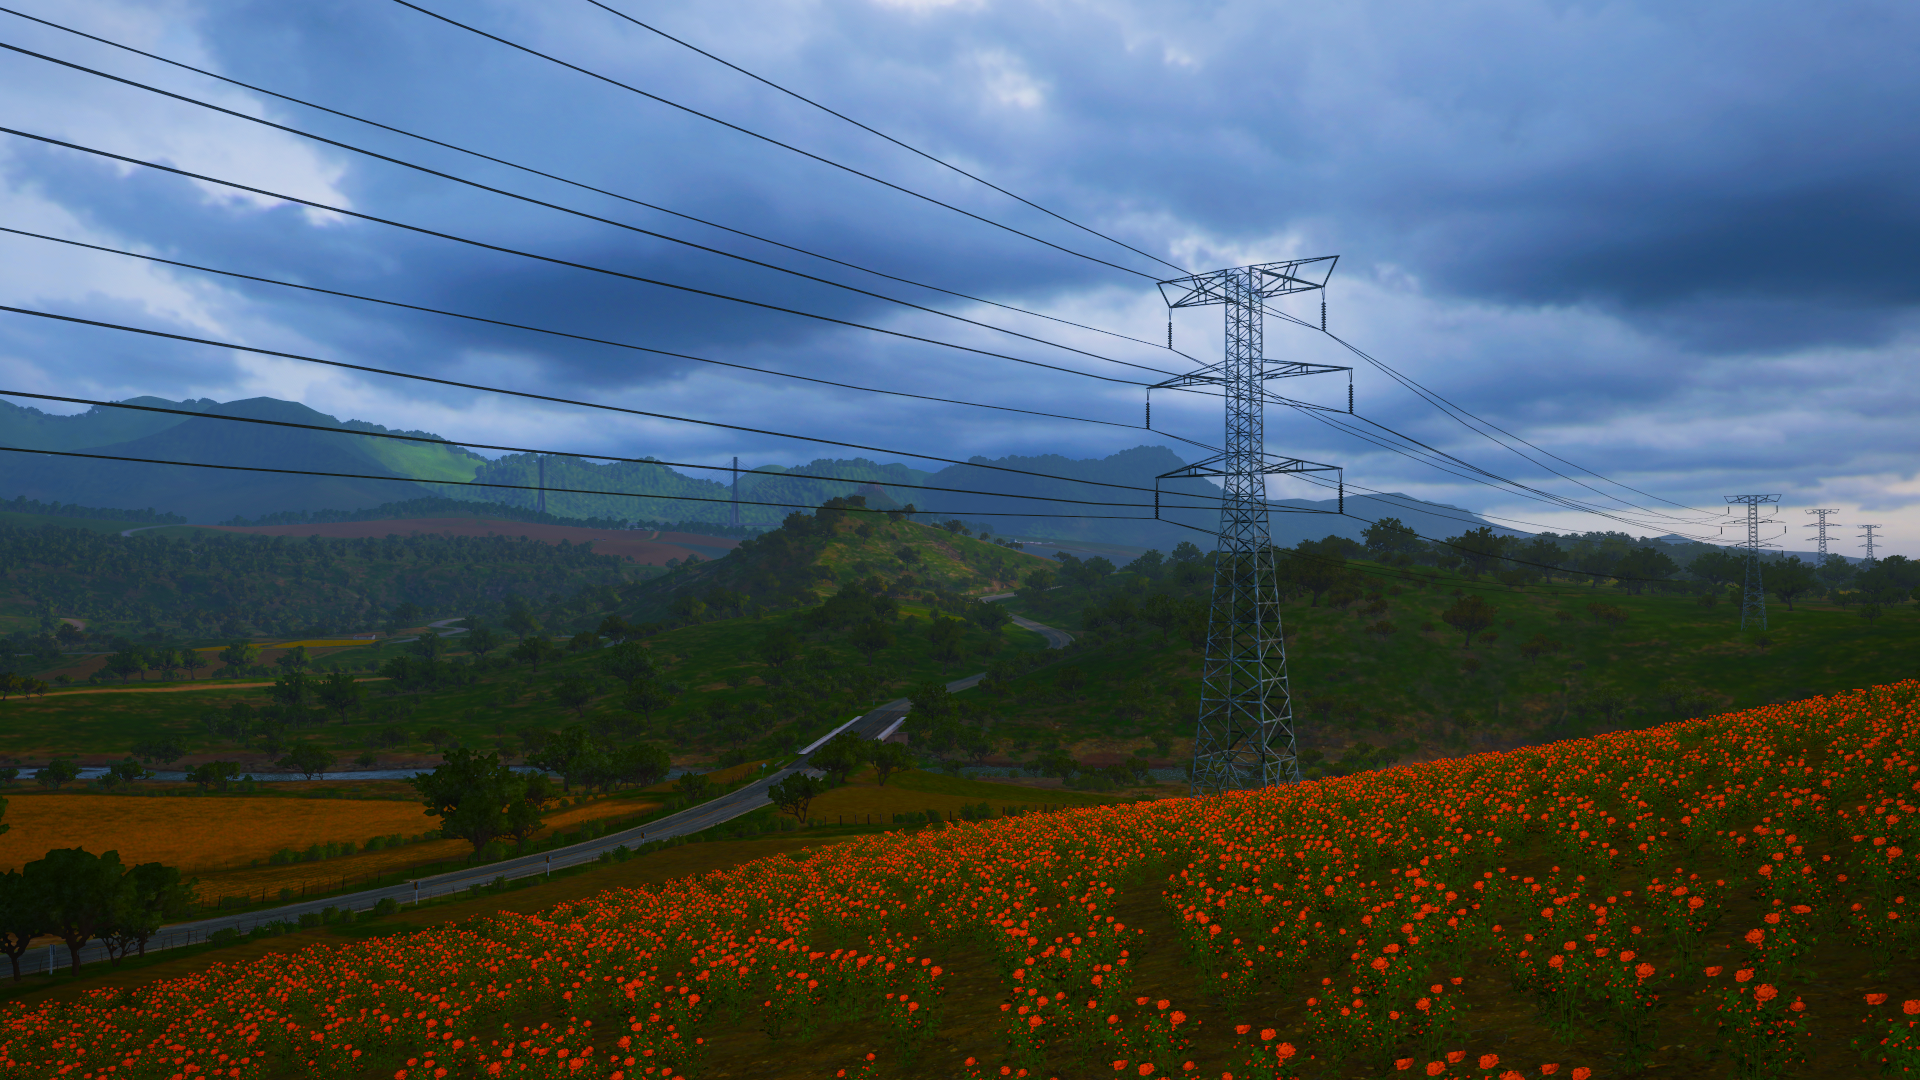 Video Games Forza Forza Horizon 5 Landscape Sky Clouds Hills Trees Utility Pole Flowers Road Blue Gr 1920x1080